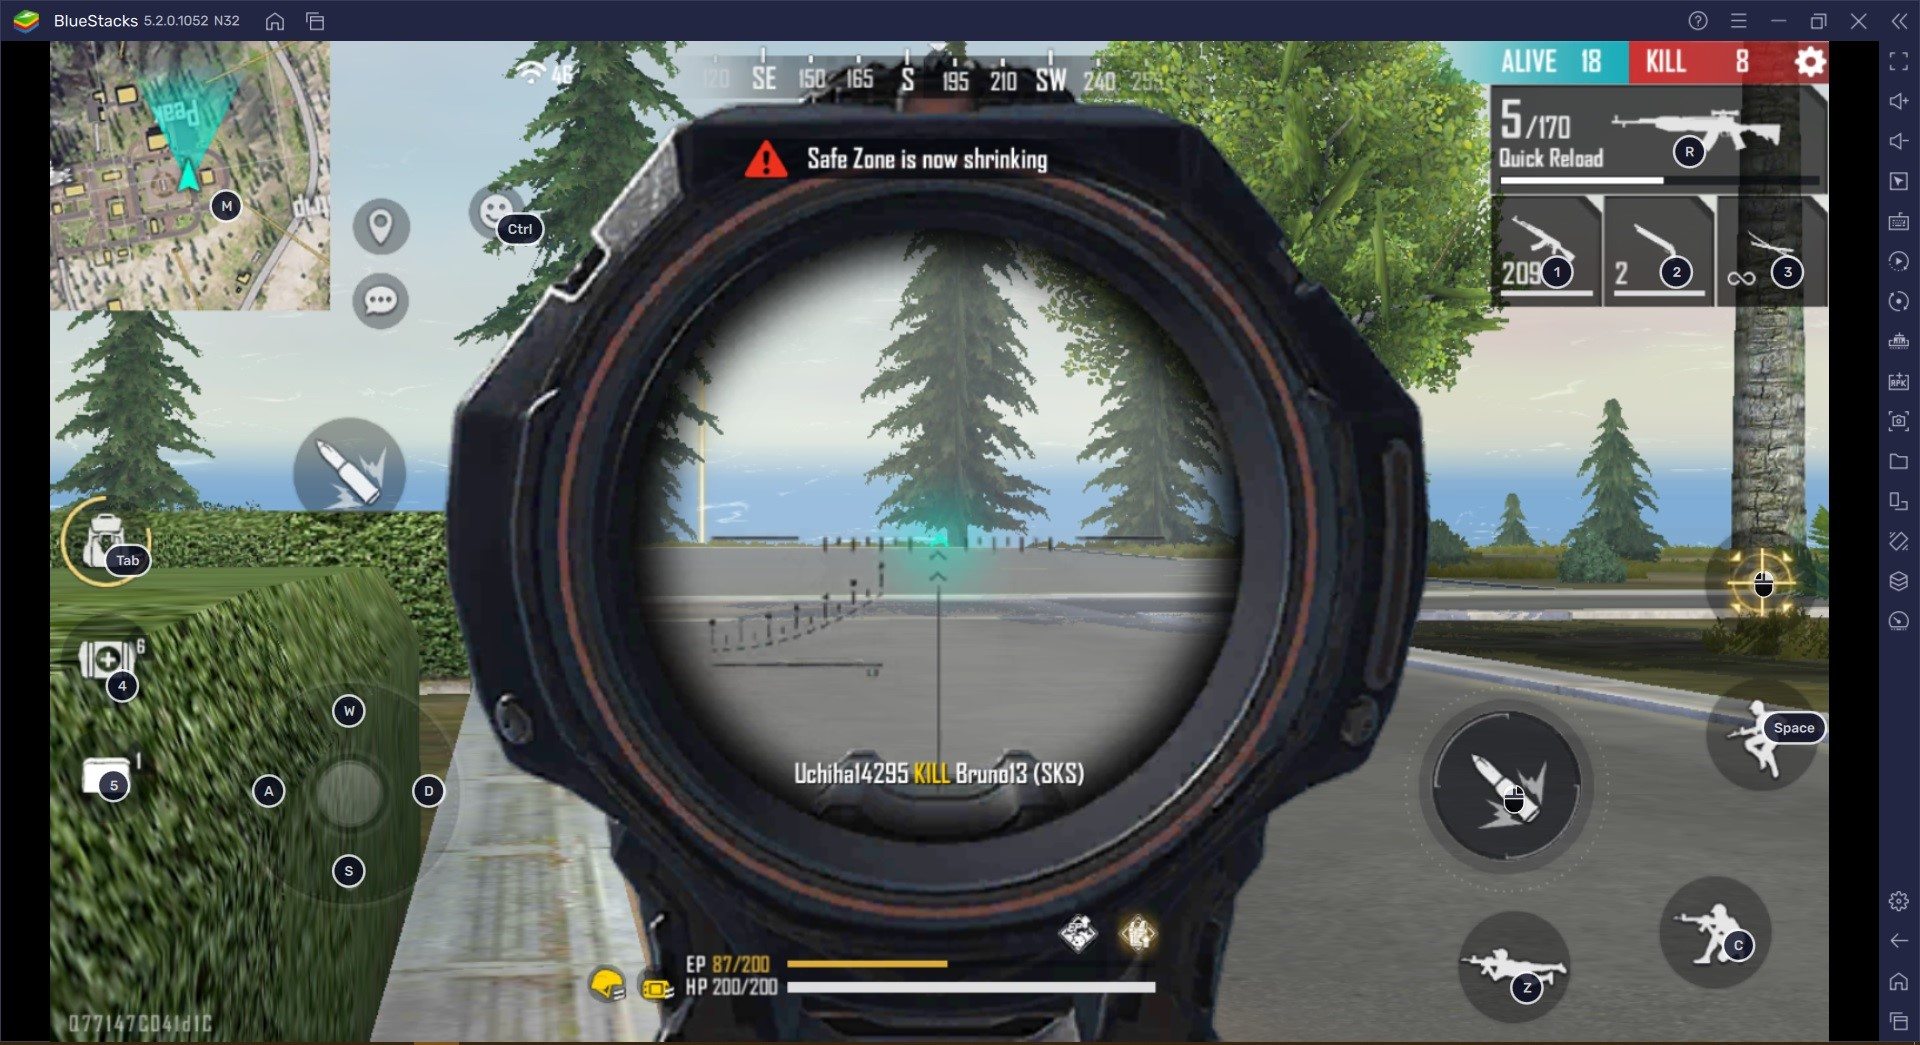 Free Fire Game Online - How to Play, Rules & Points @